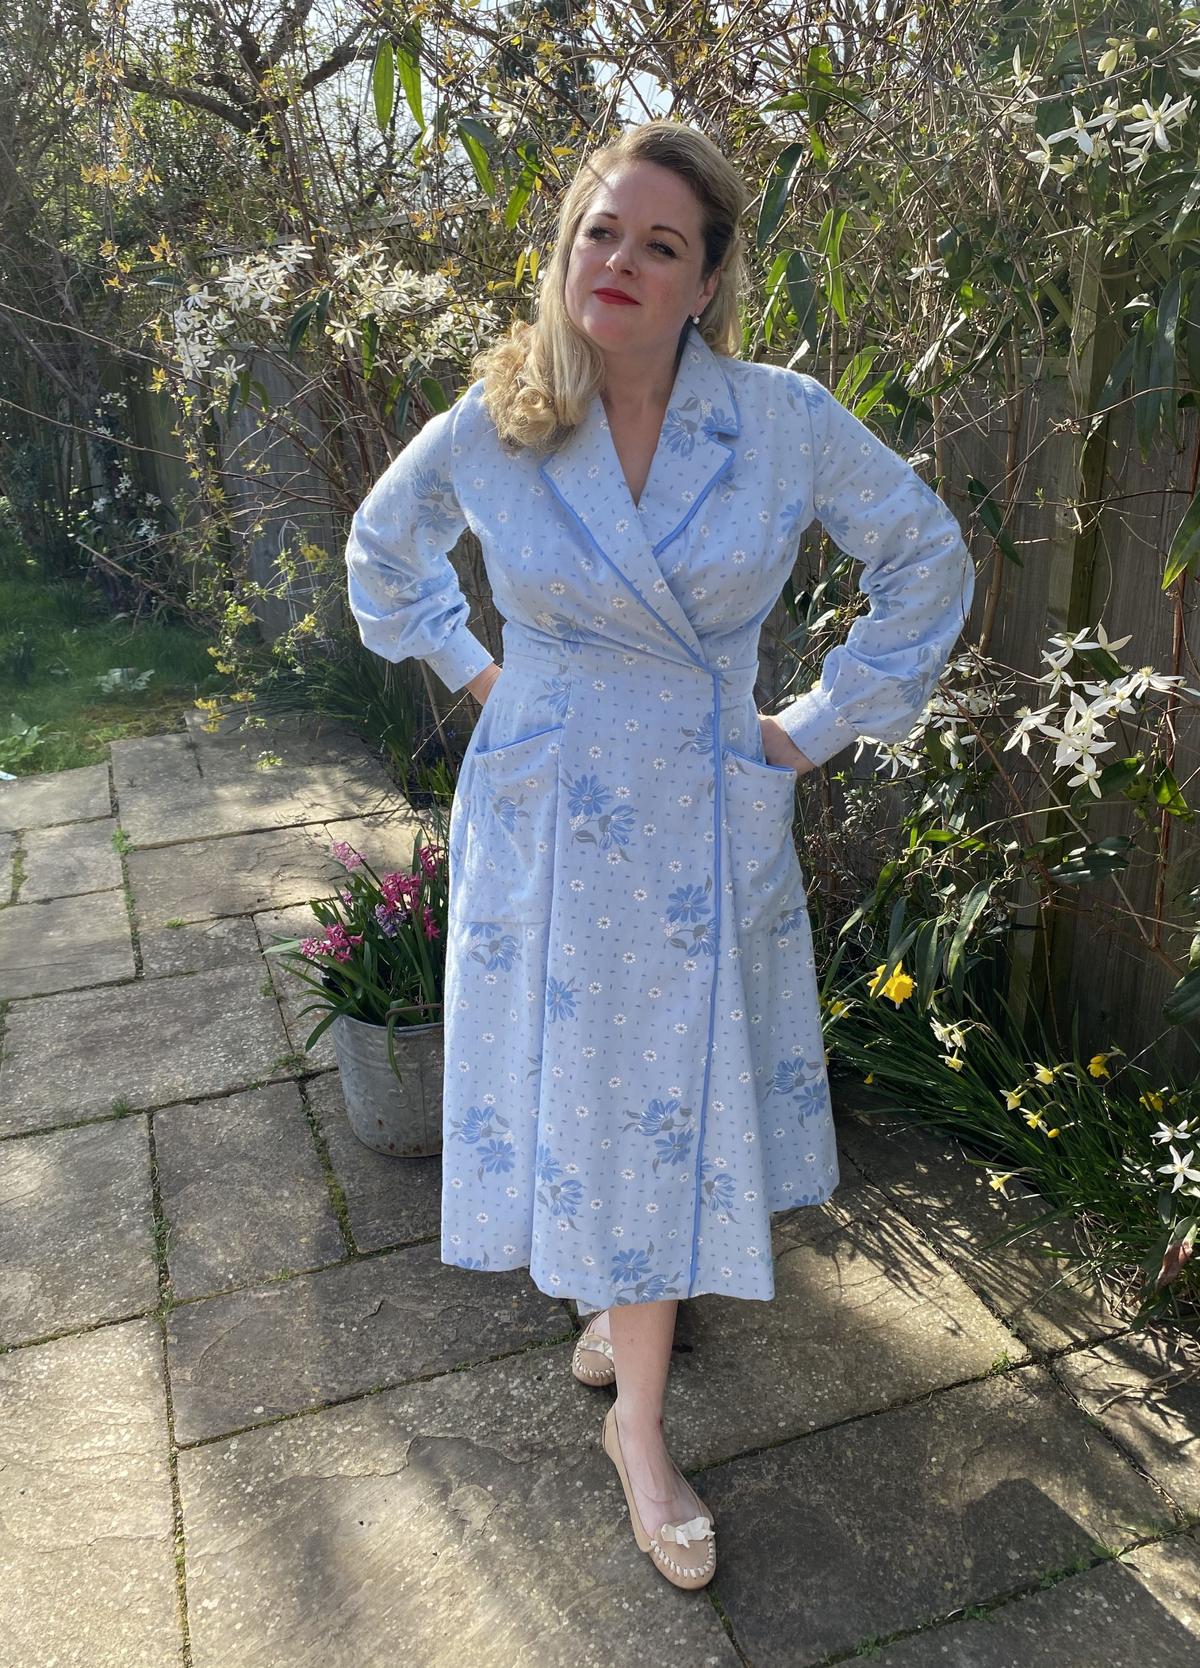 Rosie wearing a handmade housedress made out of a charity shop flannel sheet. (Kennedy News and Media)